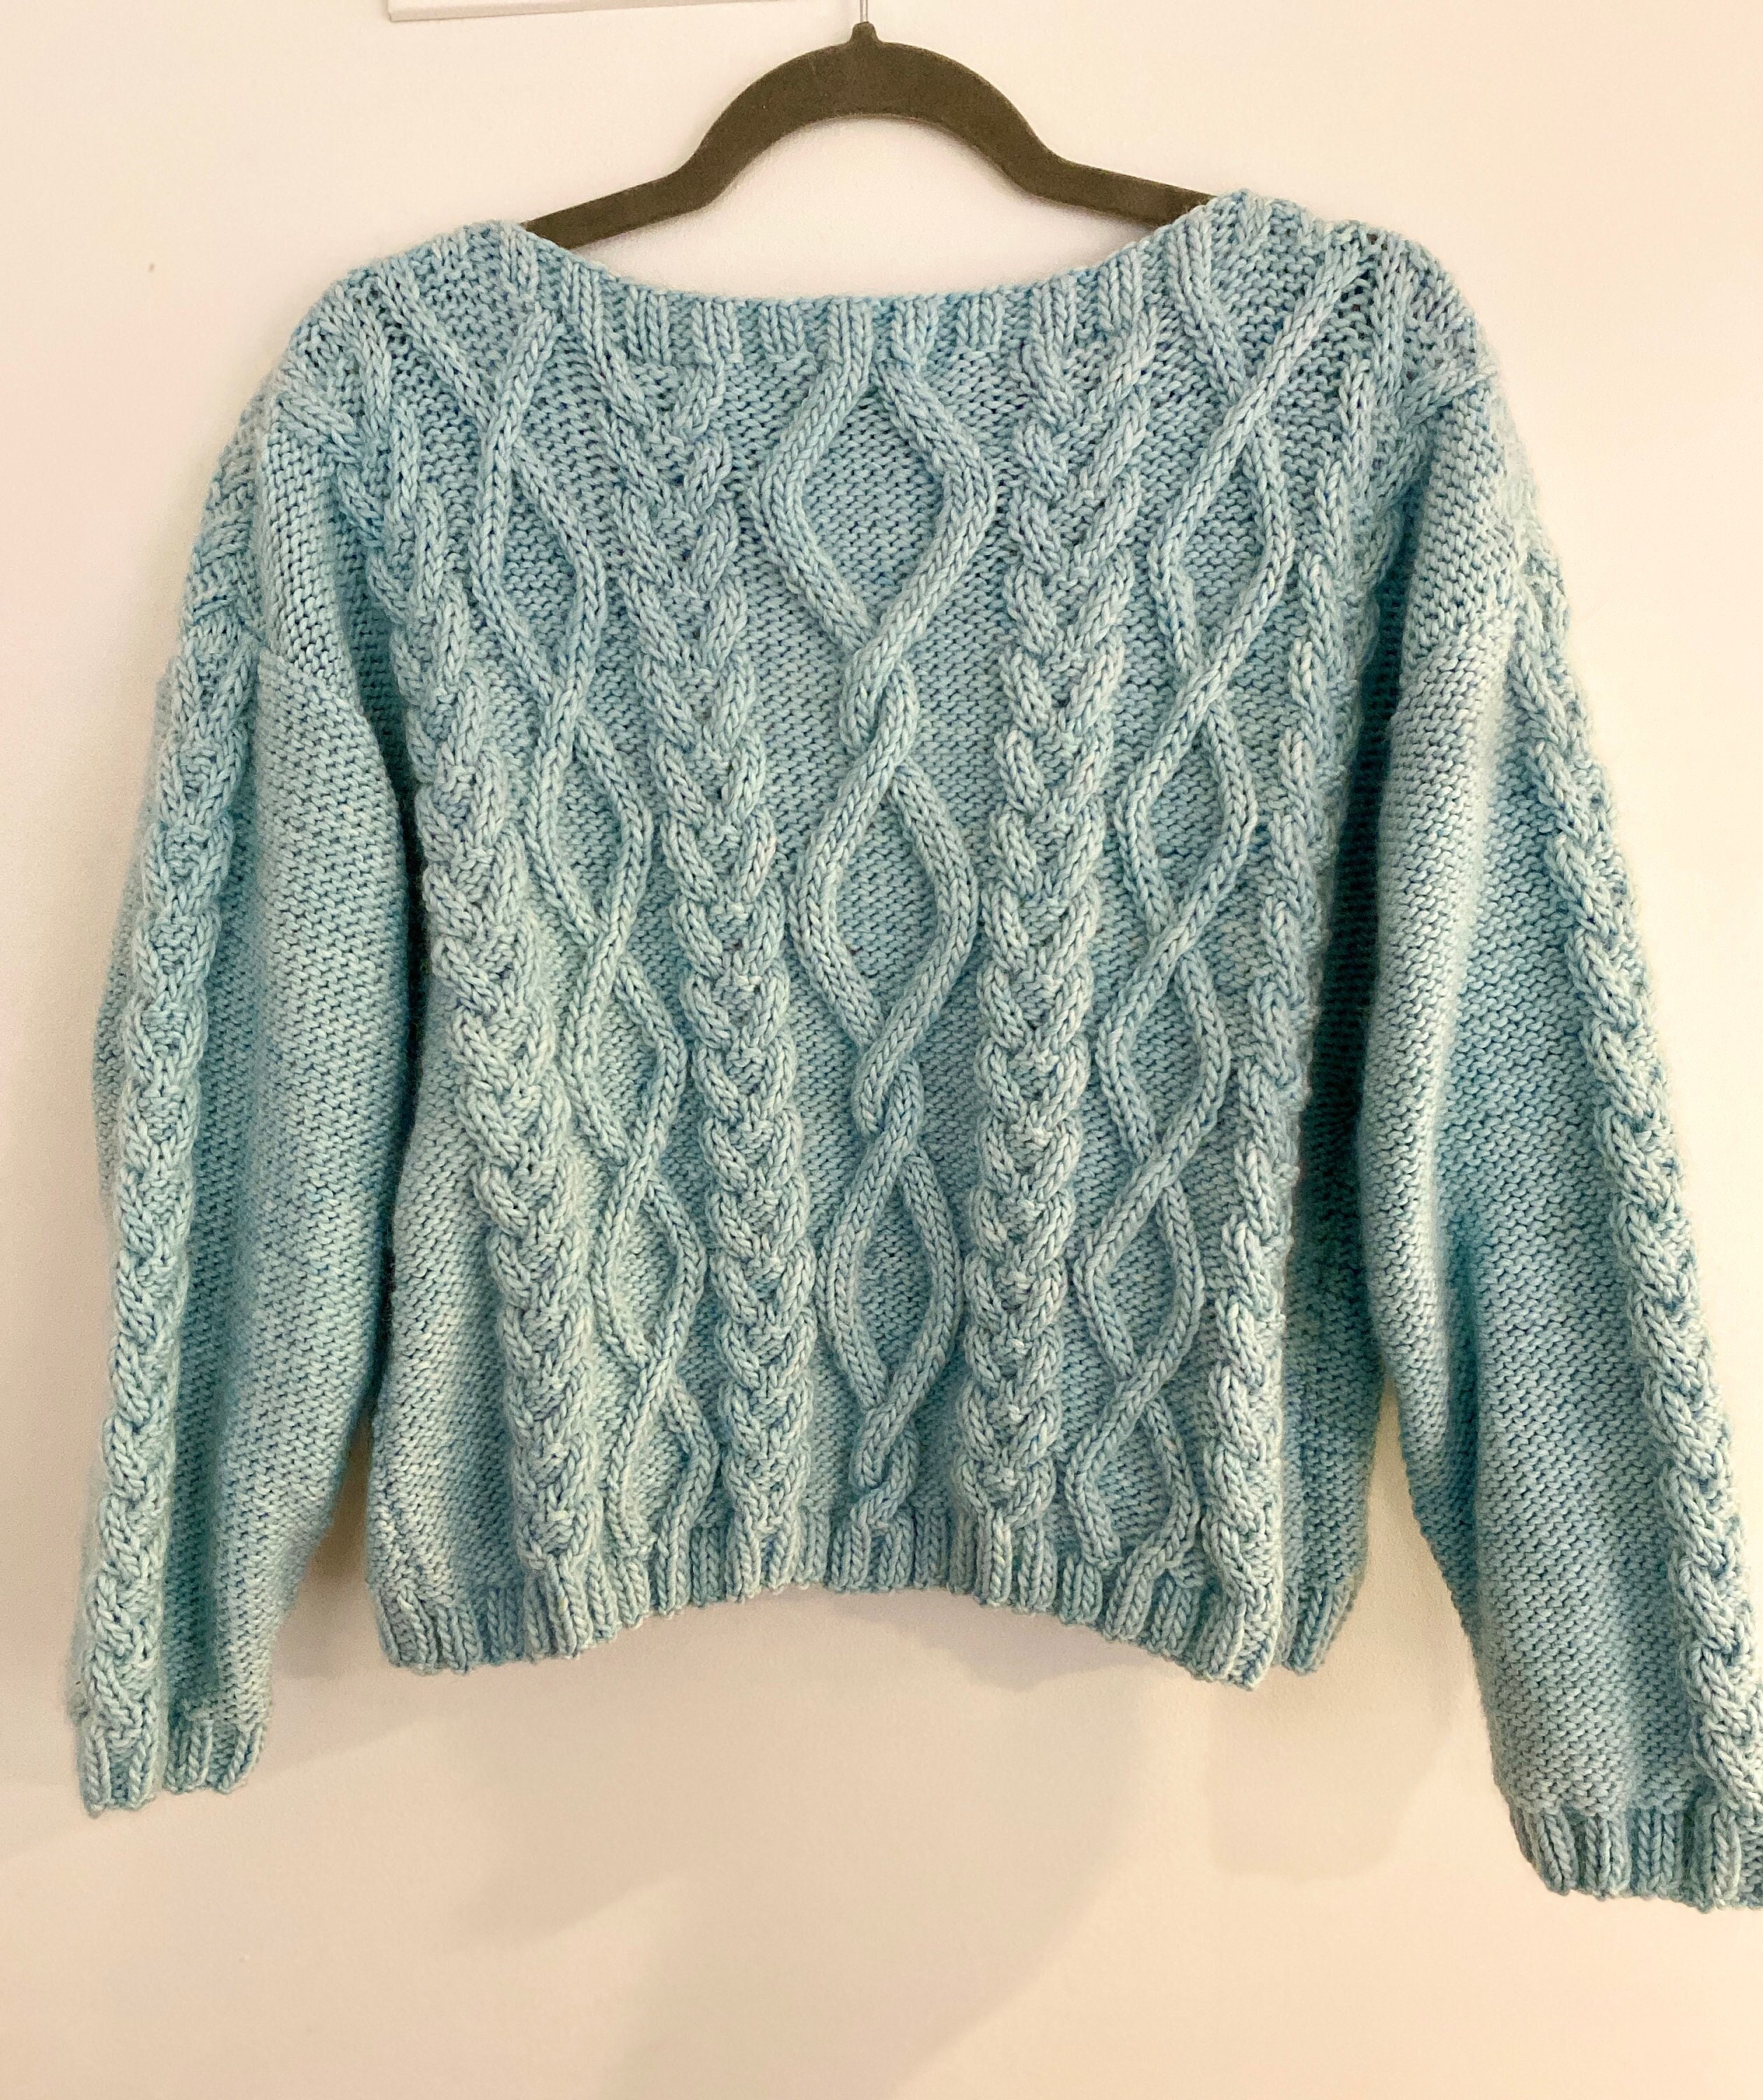 Oversized Cable Knit Sweater Pattern 